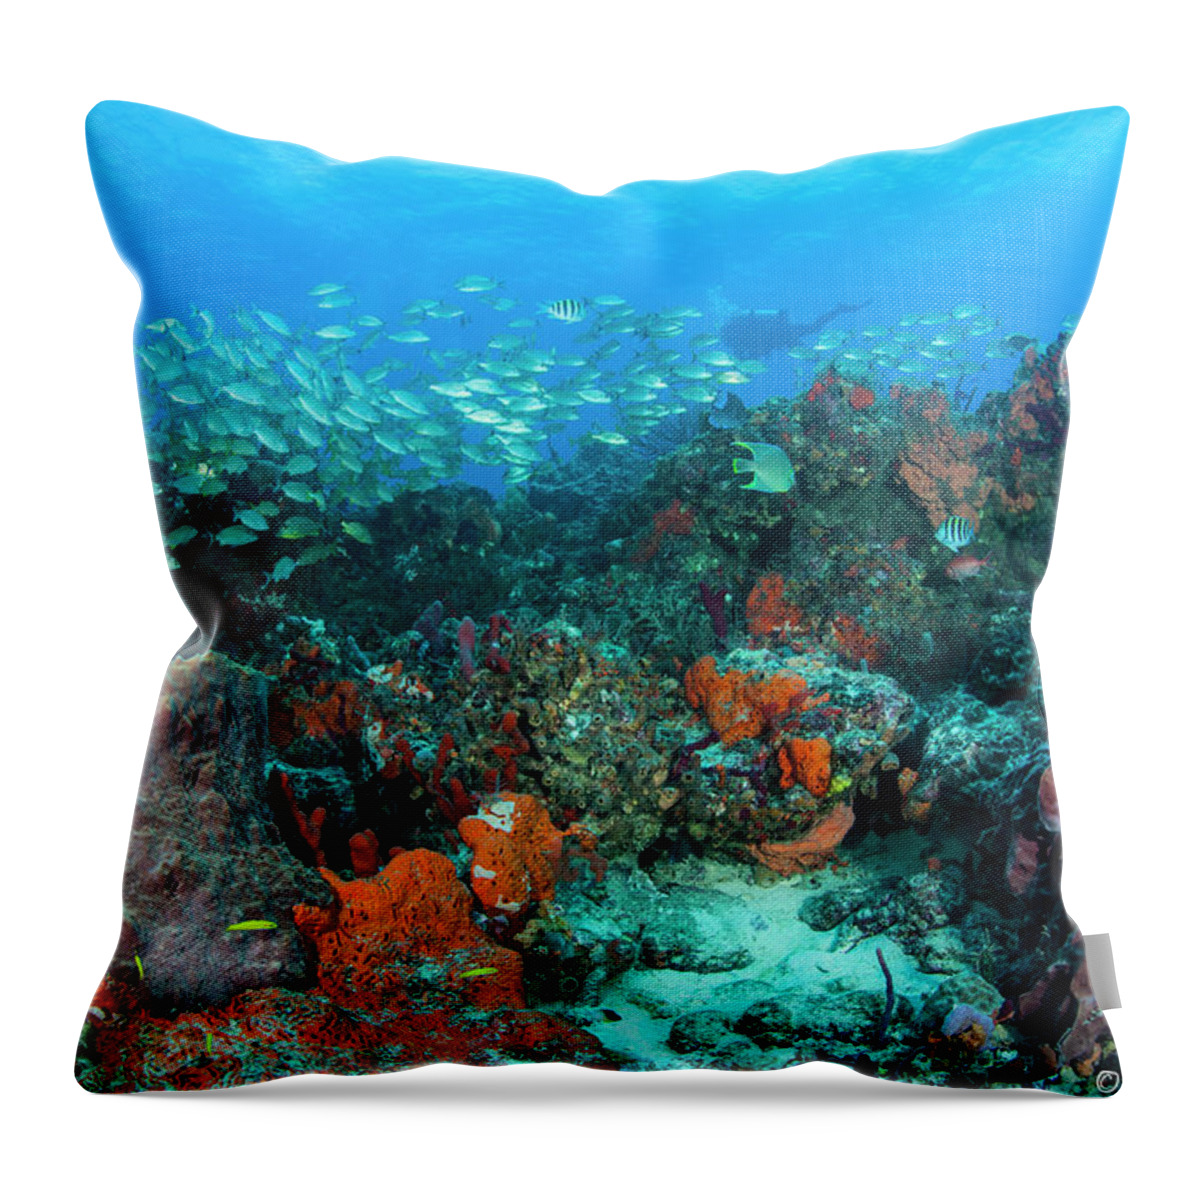 Scene.scenes Throw Pillow featuring the photograph Color Of Life by Sandra Edwards